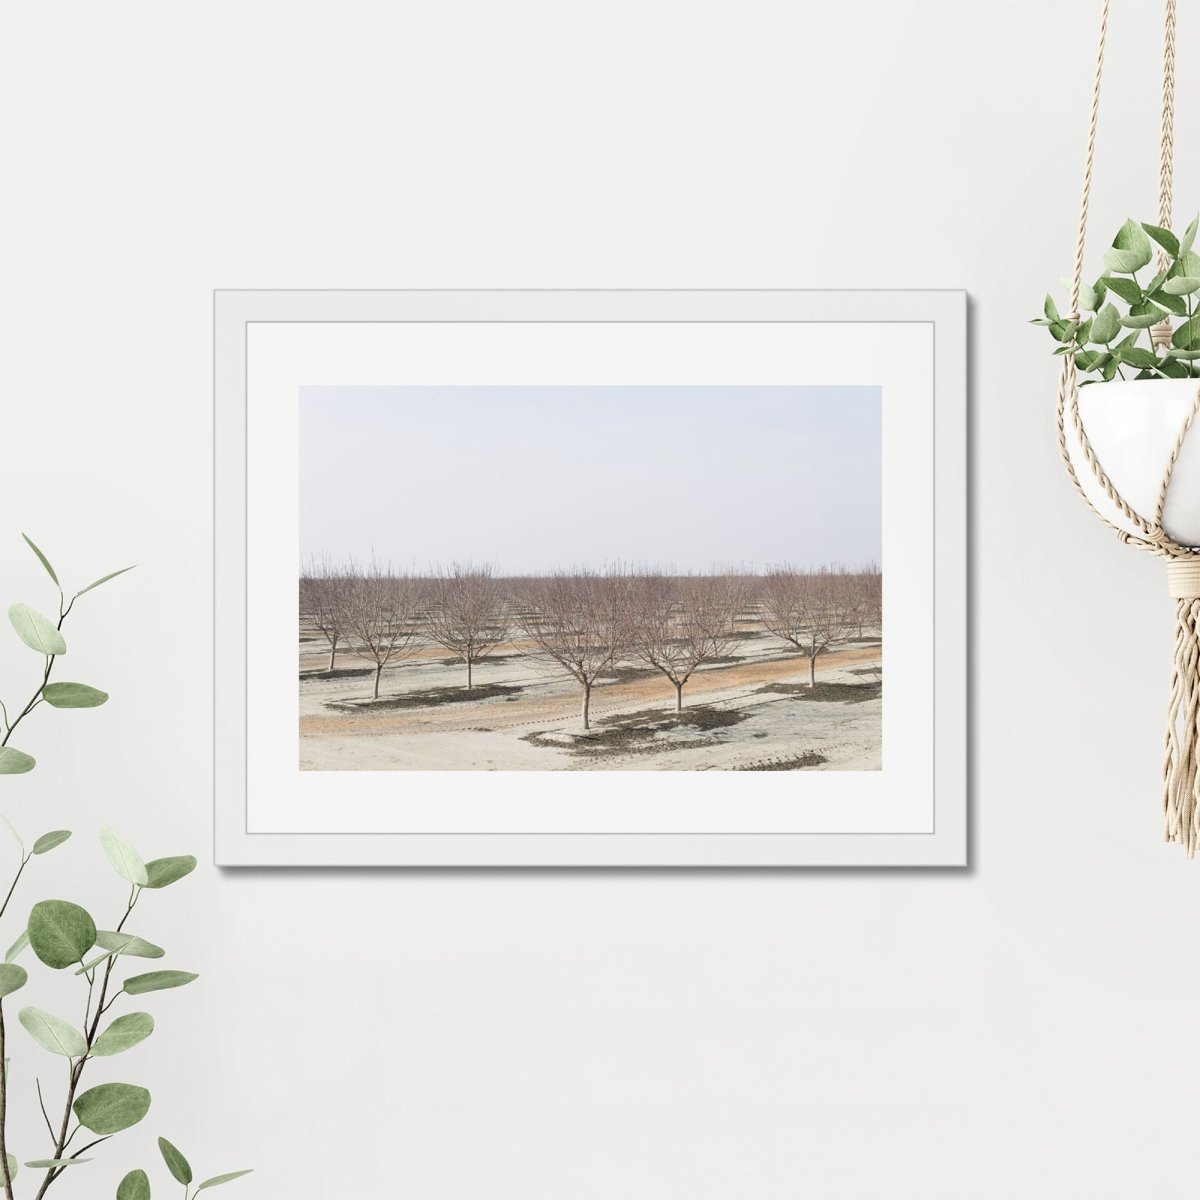 Drive the Five #8 Framed Print